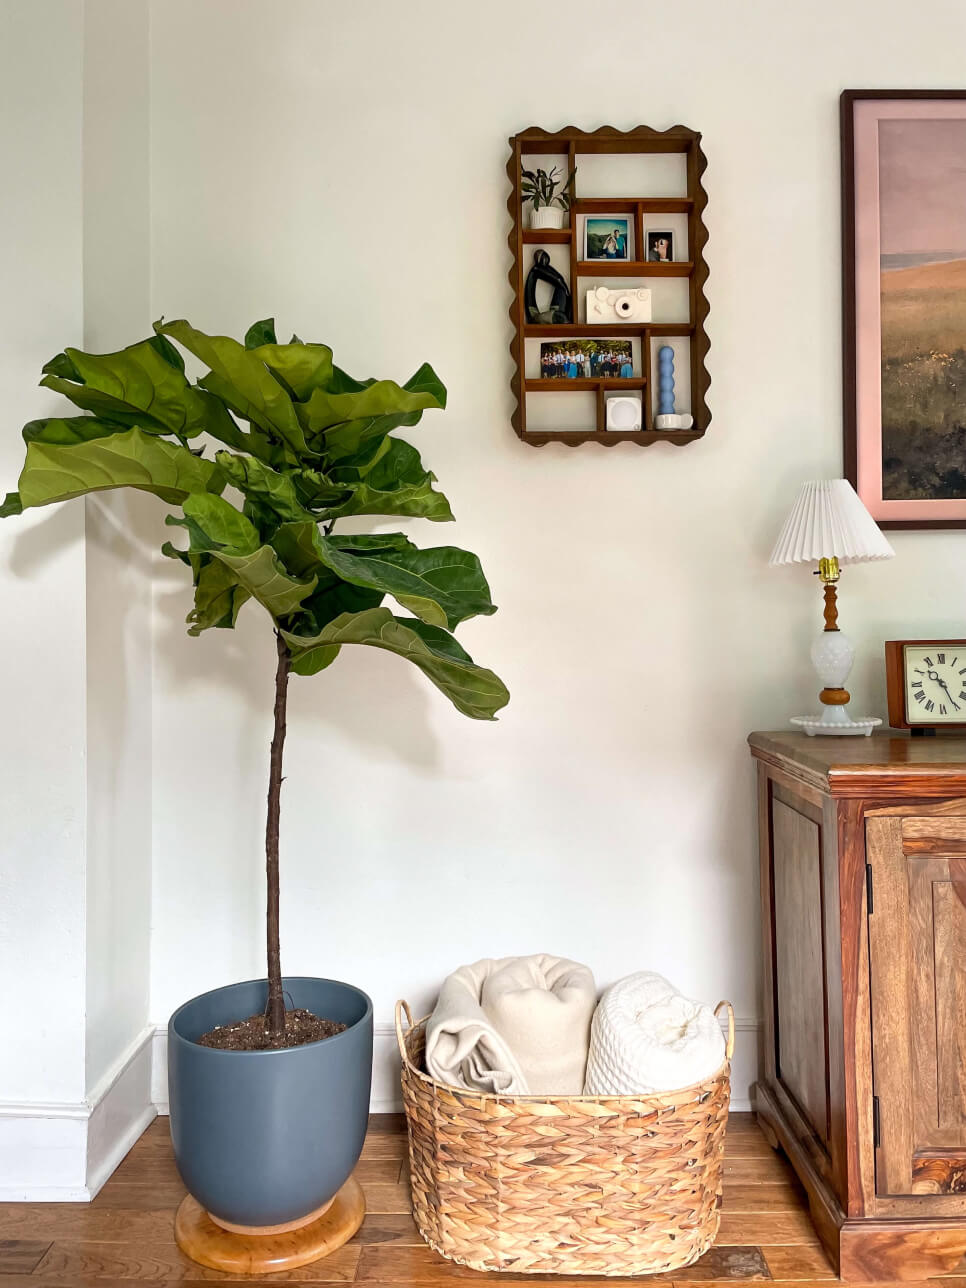 Fig plant in blue pot next to wiggly shelf and small objects